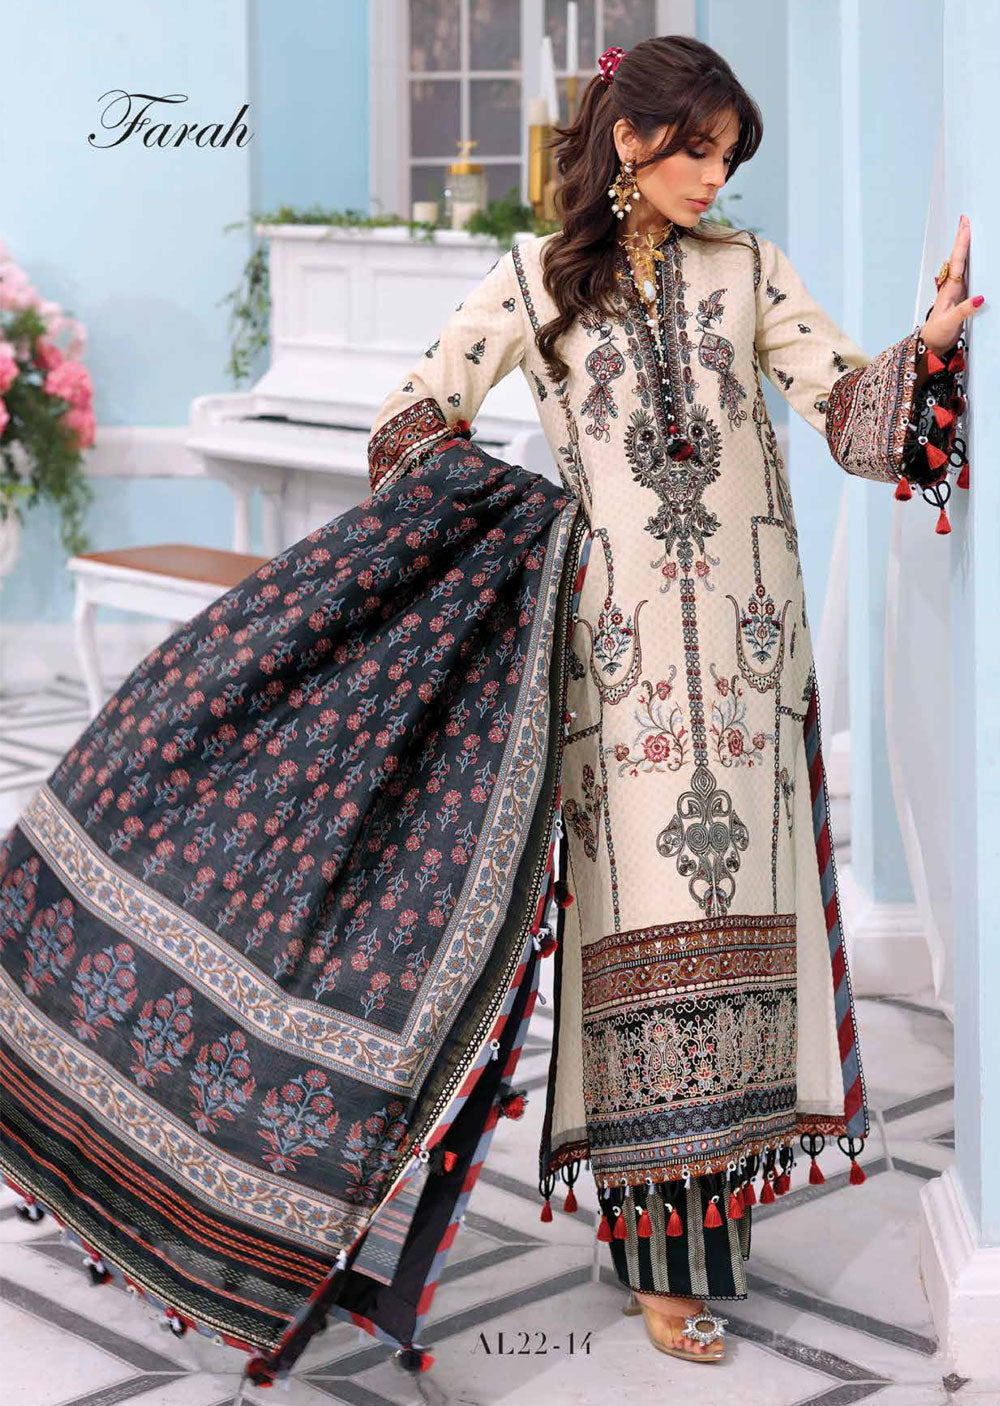 AL22-14 - Unstitched - Afsana Luxury Lawn Collection by Anaya Chaudhry - Memsaab Online